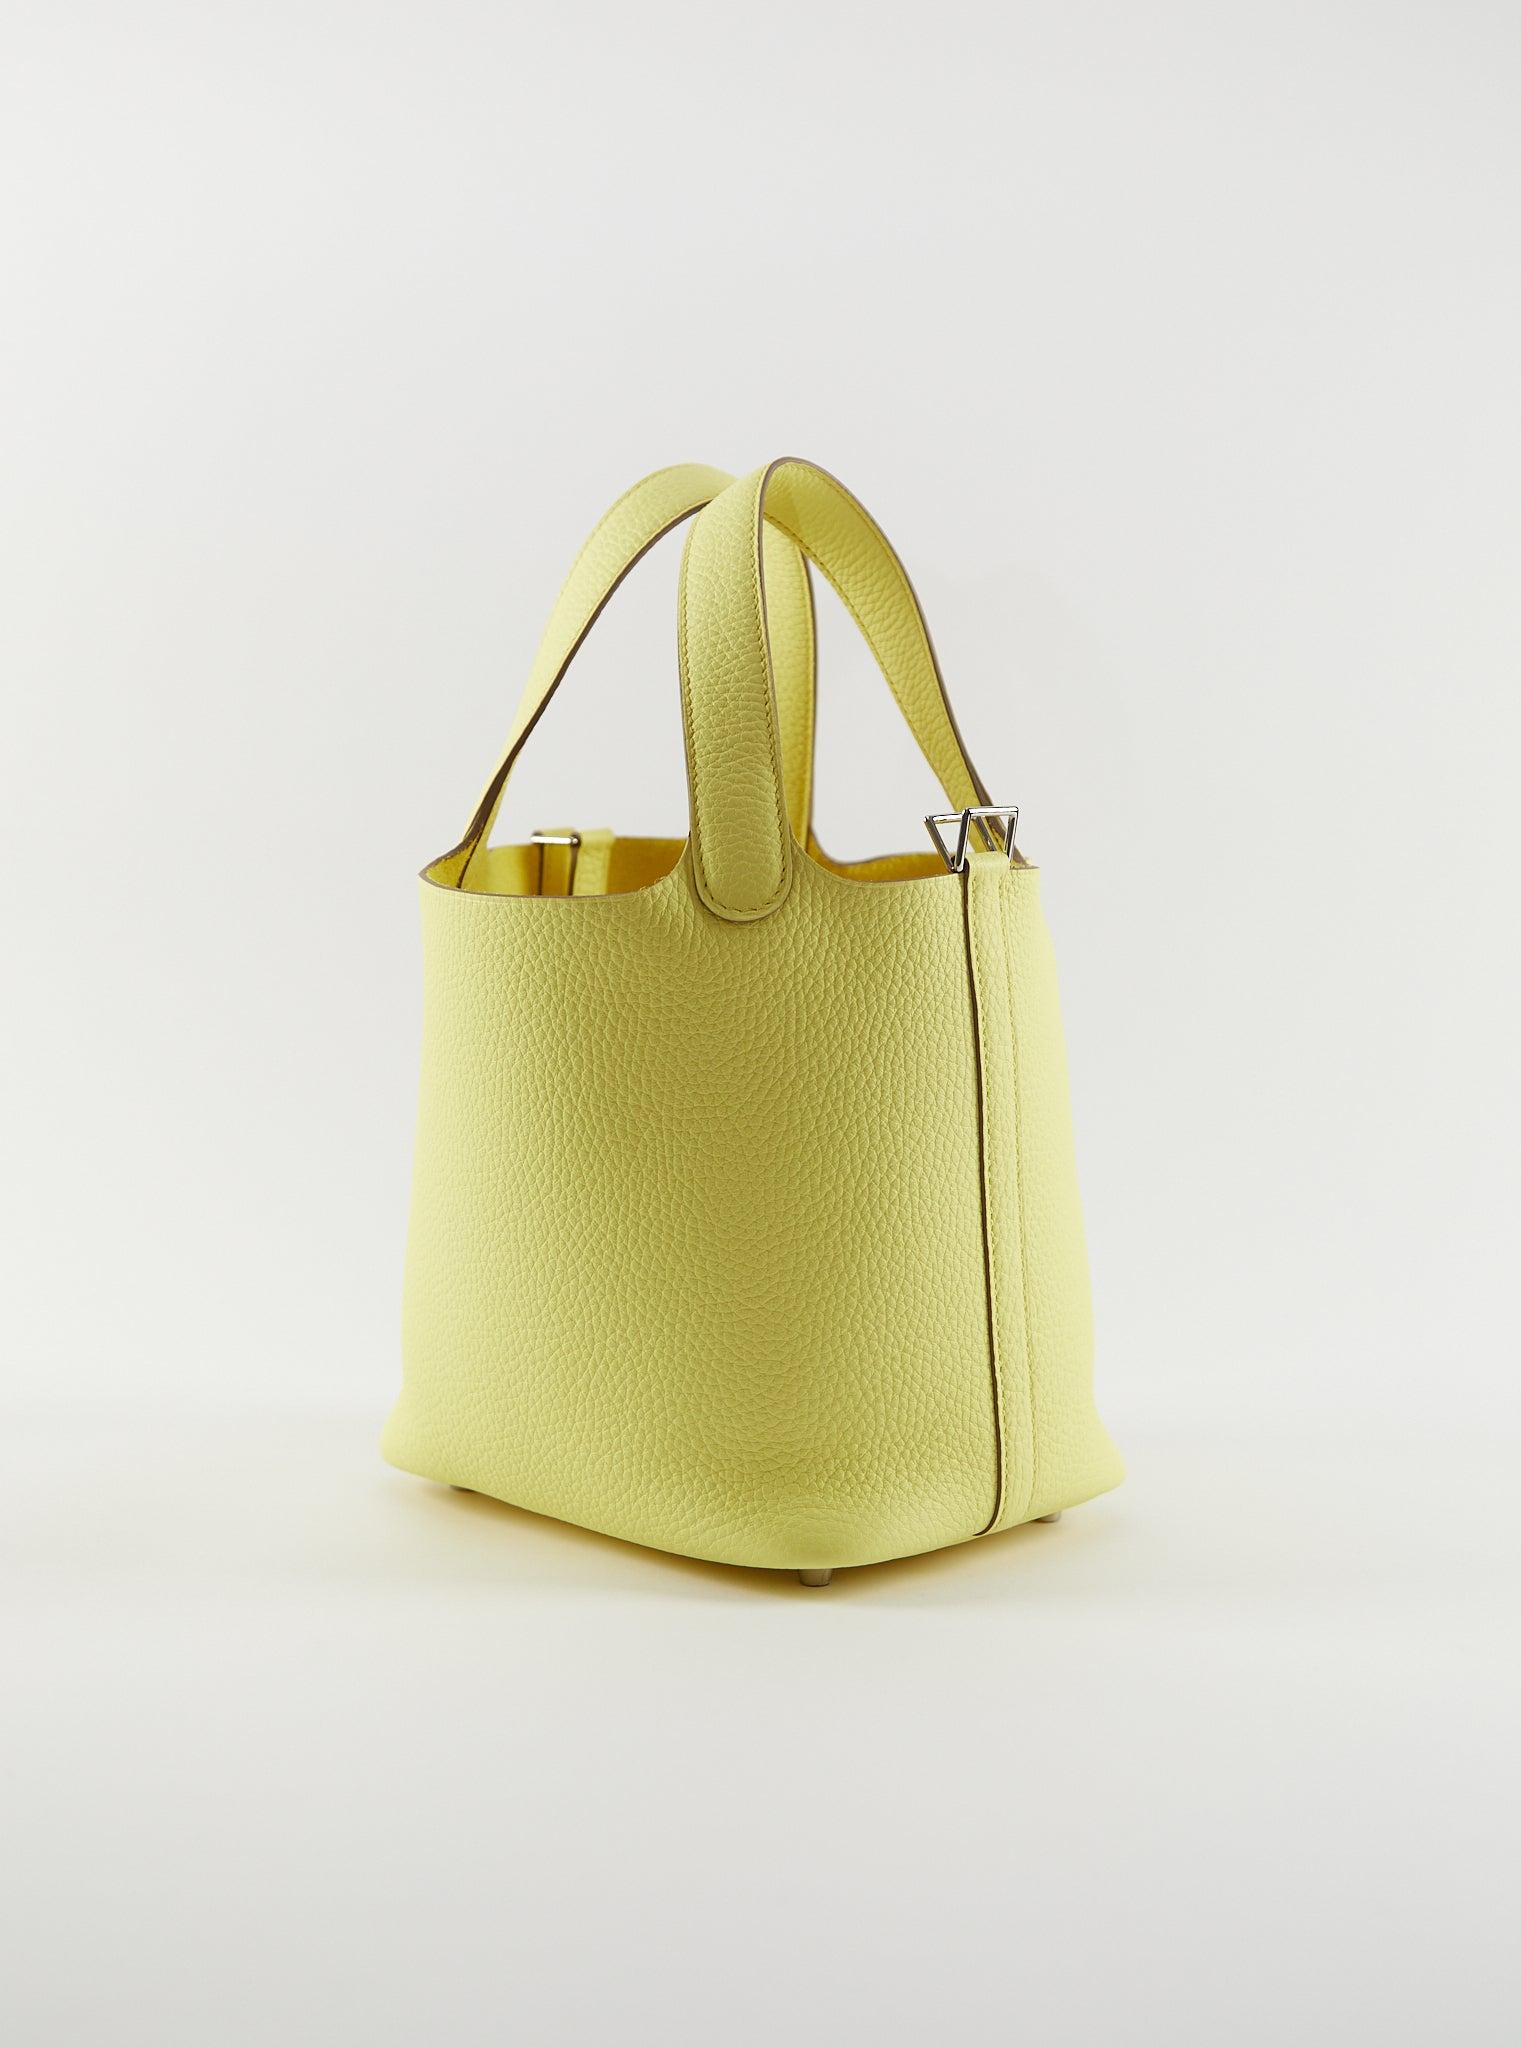 Hermès Picotin 18cm in Limoncello

Clemence Leather with Palladium Hardware

U Stamp / 2023

Accompanied by: Copy receipt, Hermes box, Hermes dustbag, lock, keys, care card and ribbon

Measurements: 7